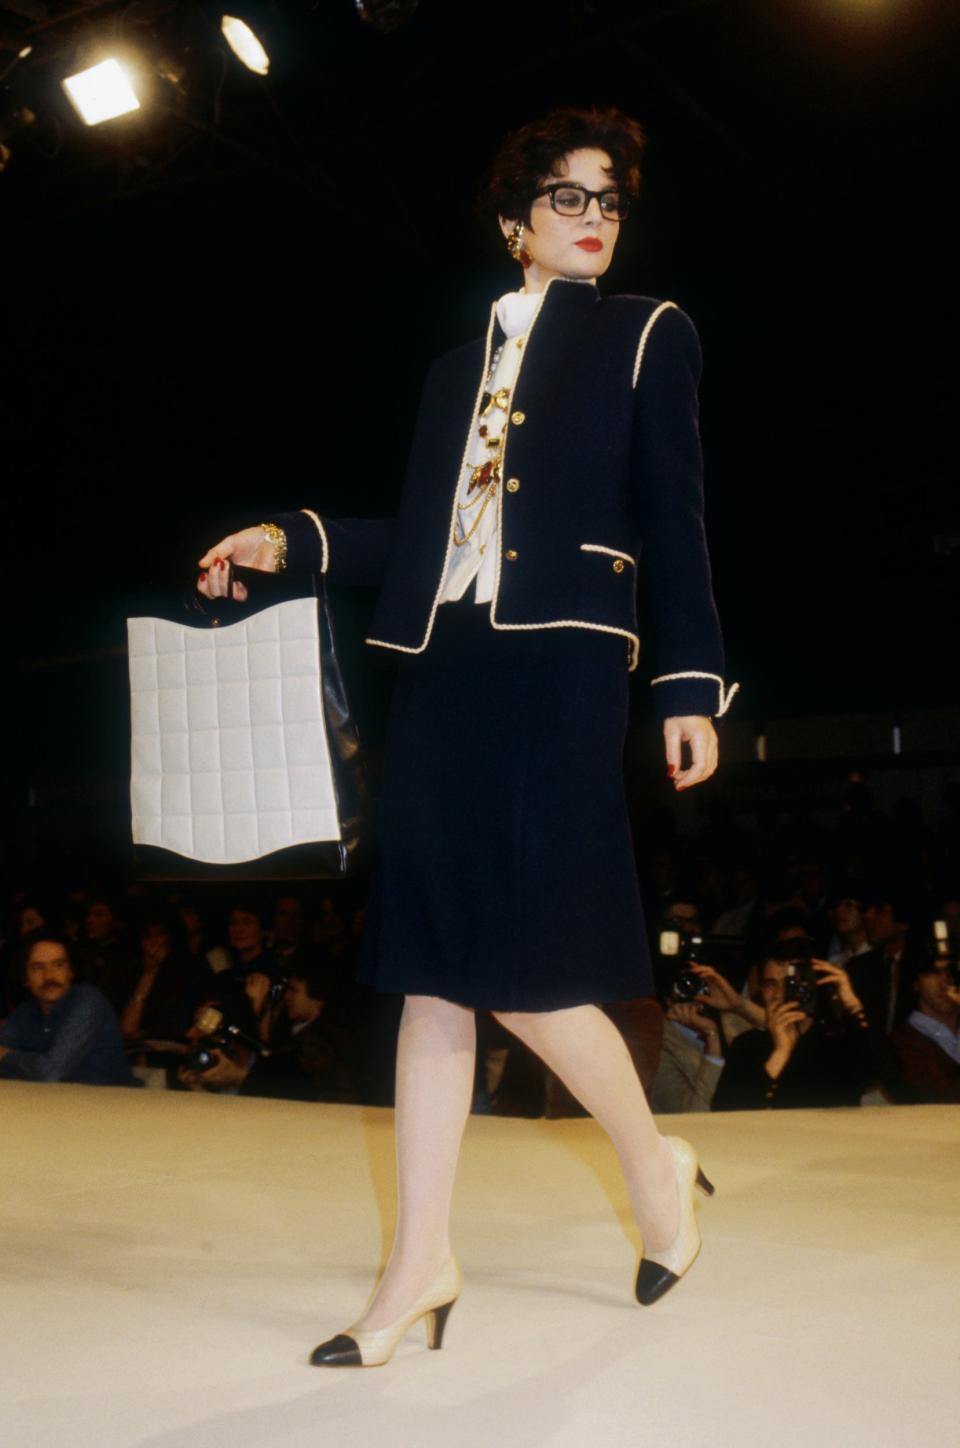 Chanel Haute Couture AW 1983Sygma via Getty Images